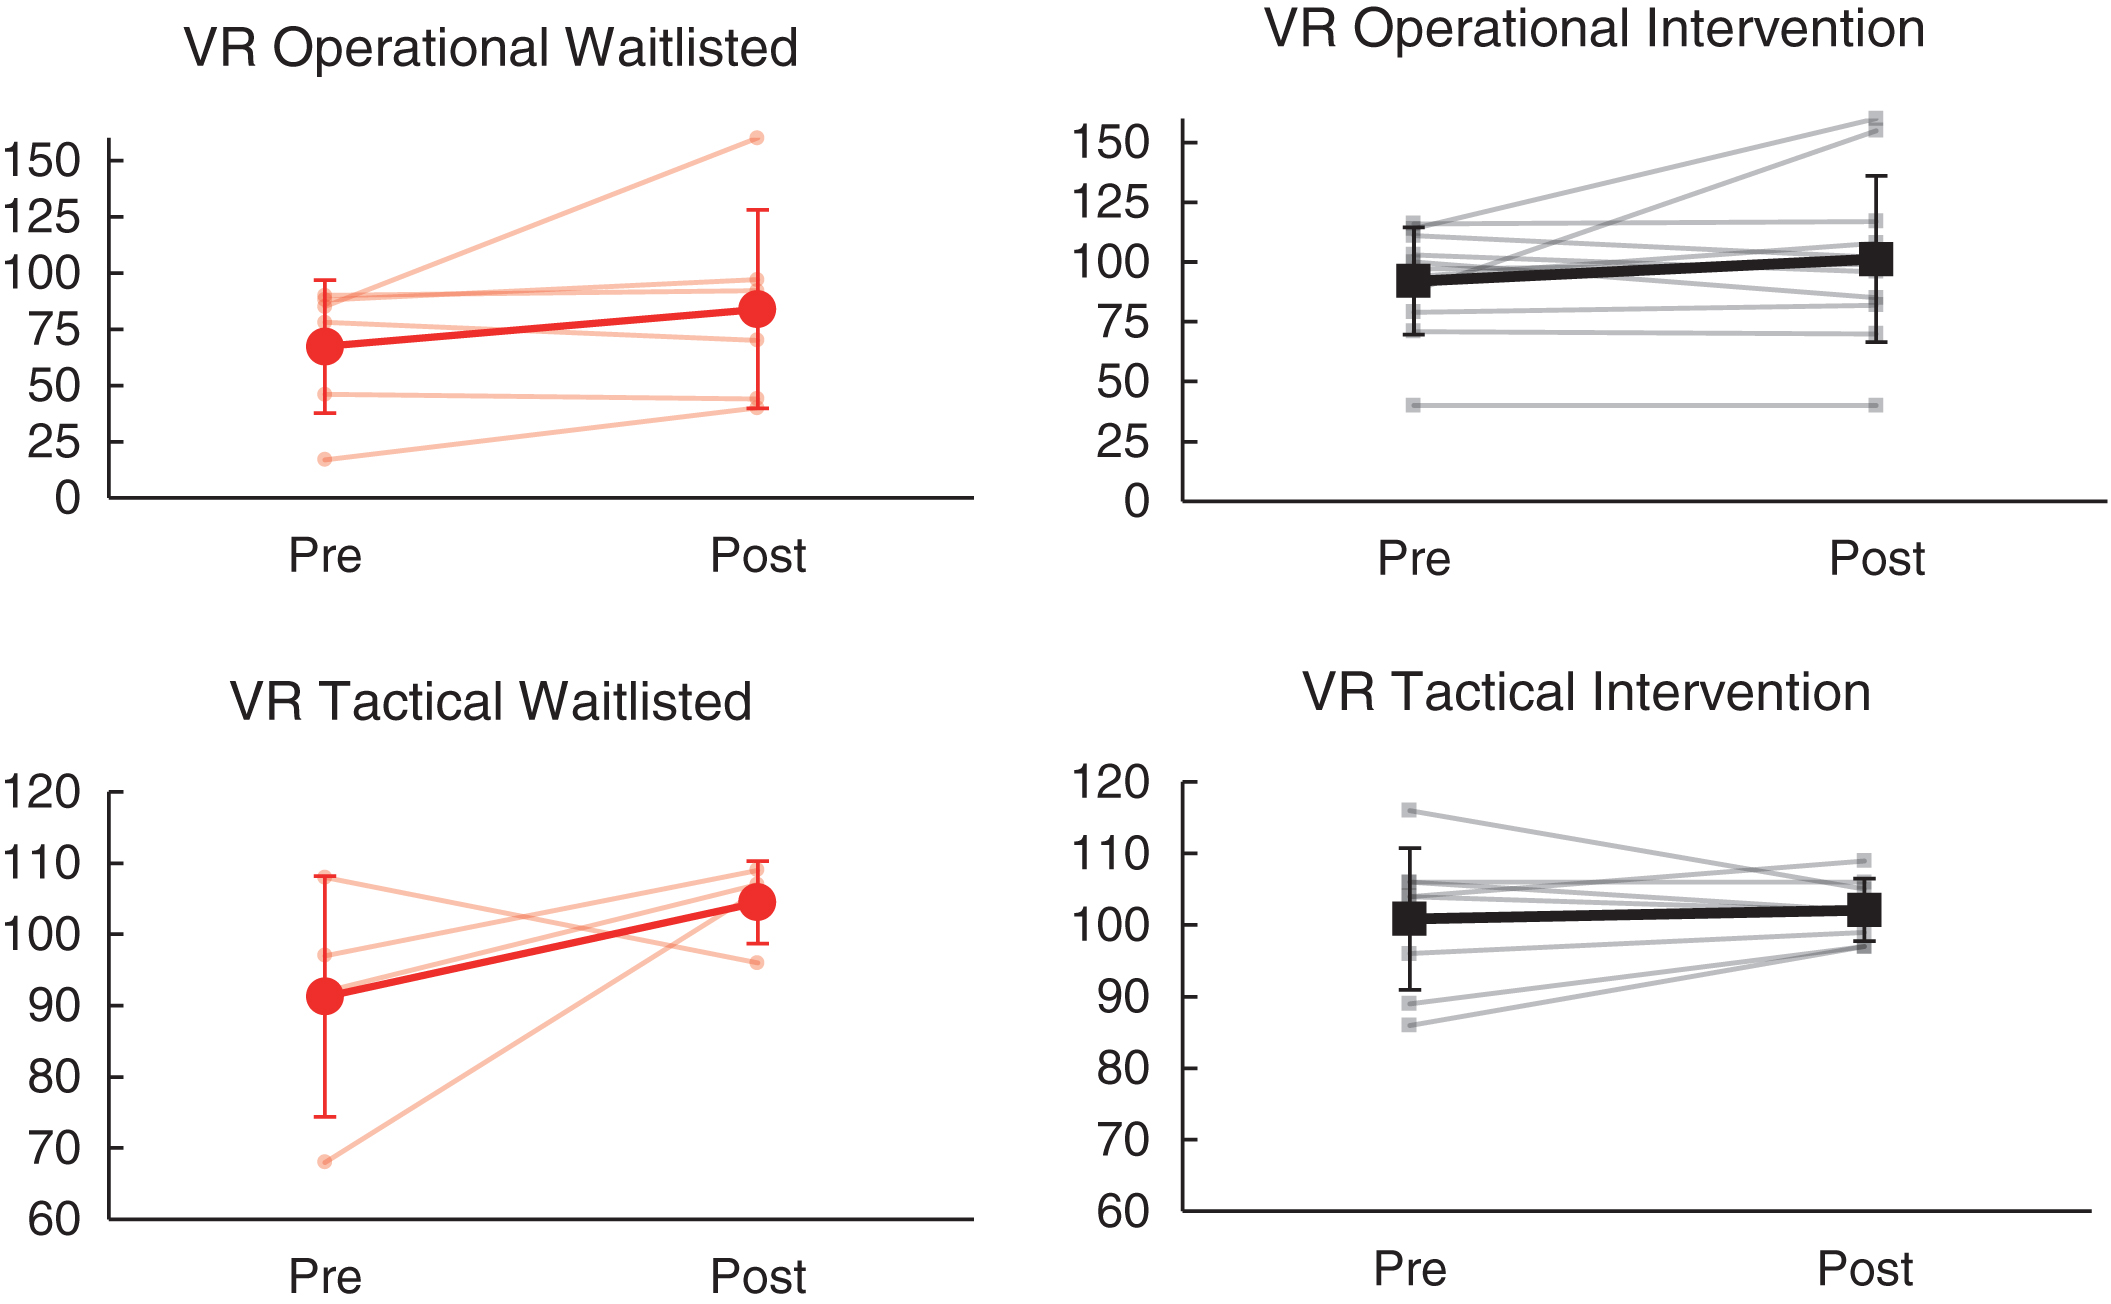 Effects of NeuroDRIVE intervention on VR driving performance.